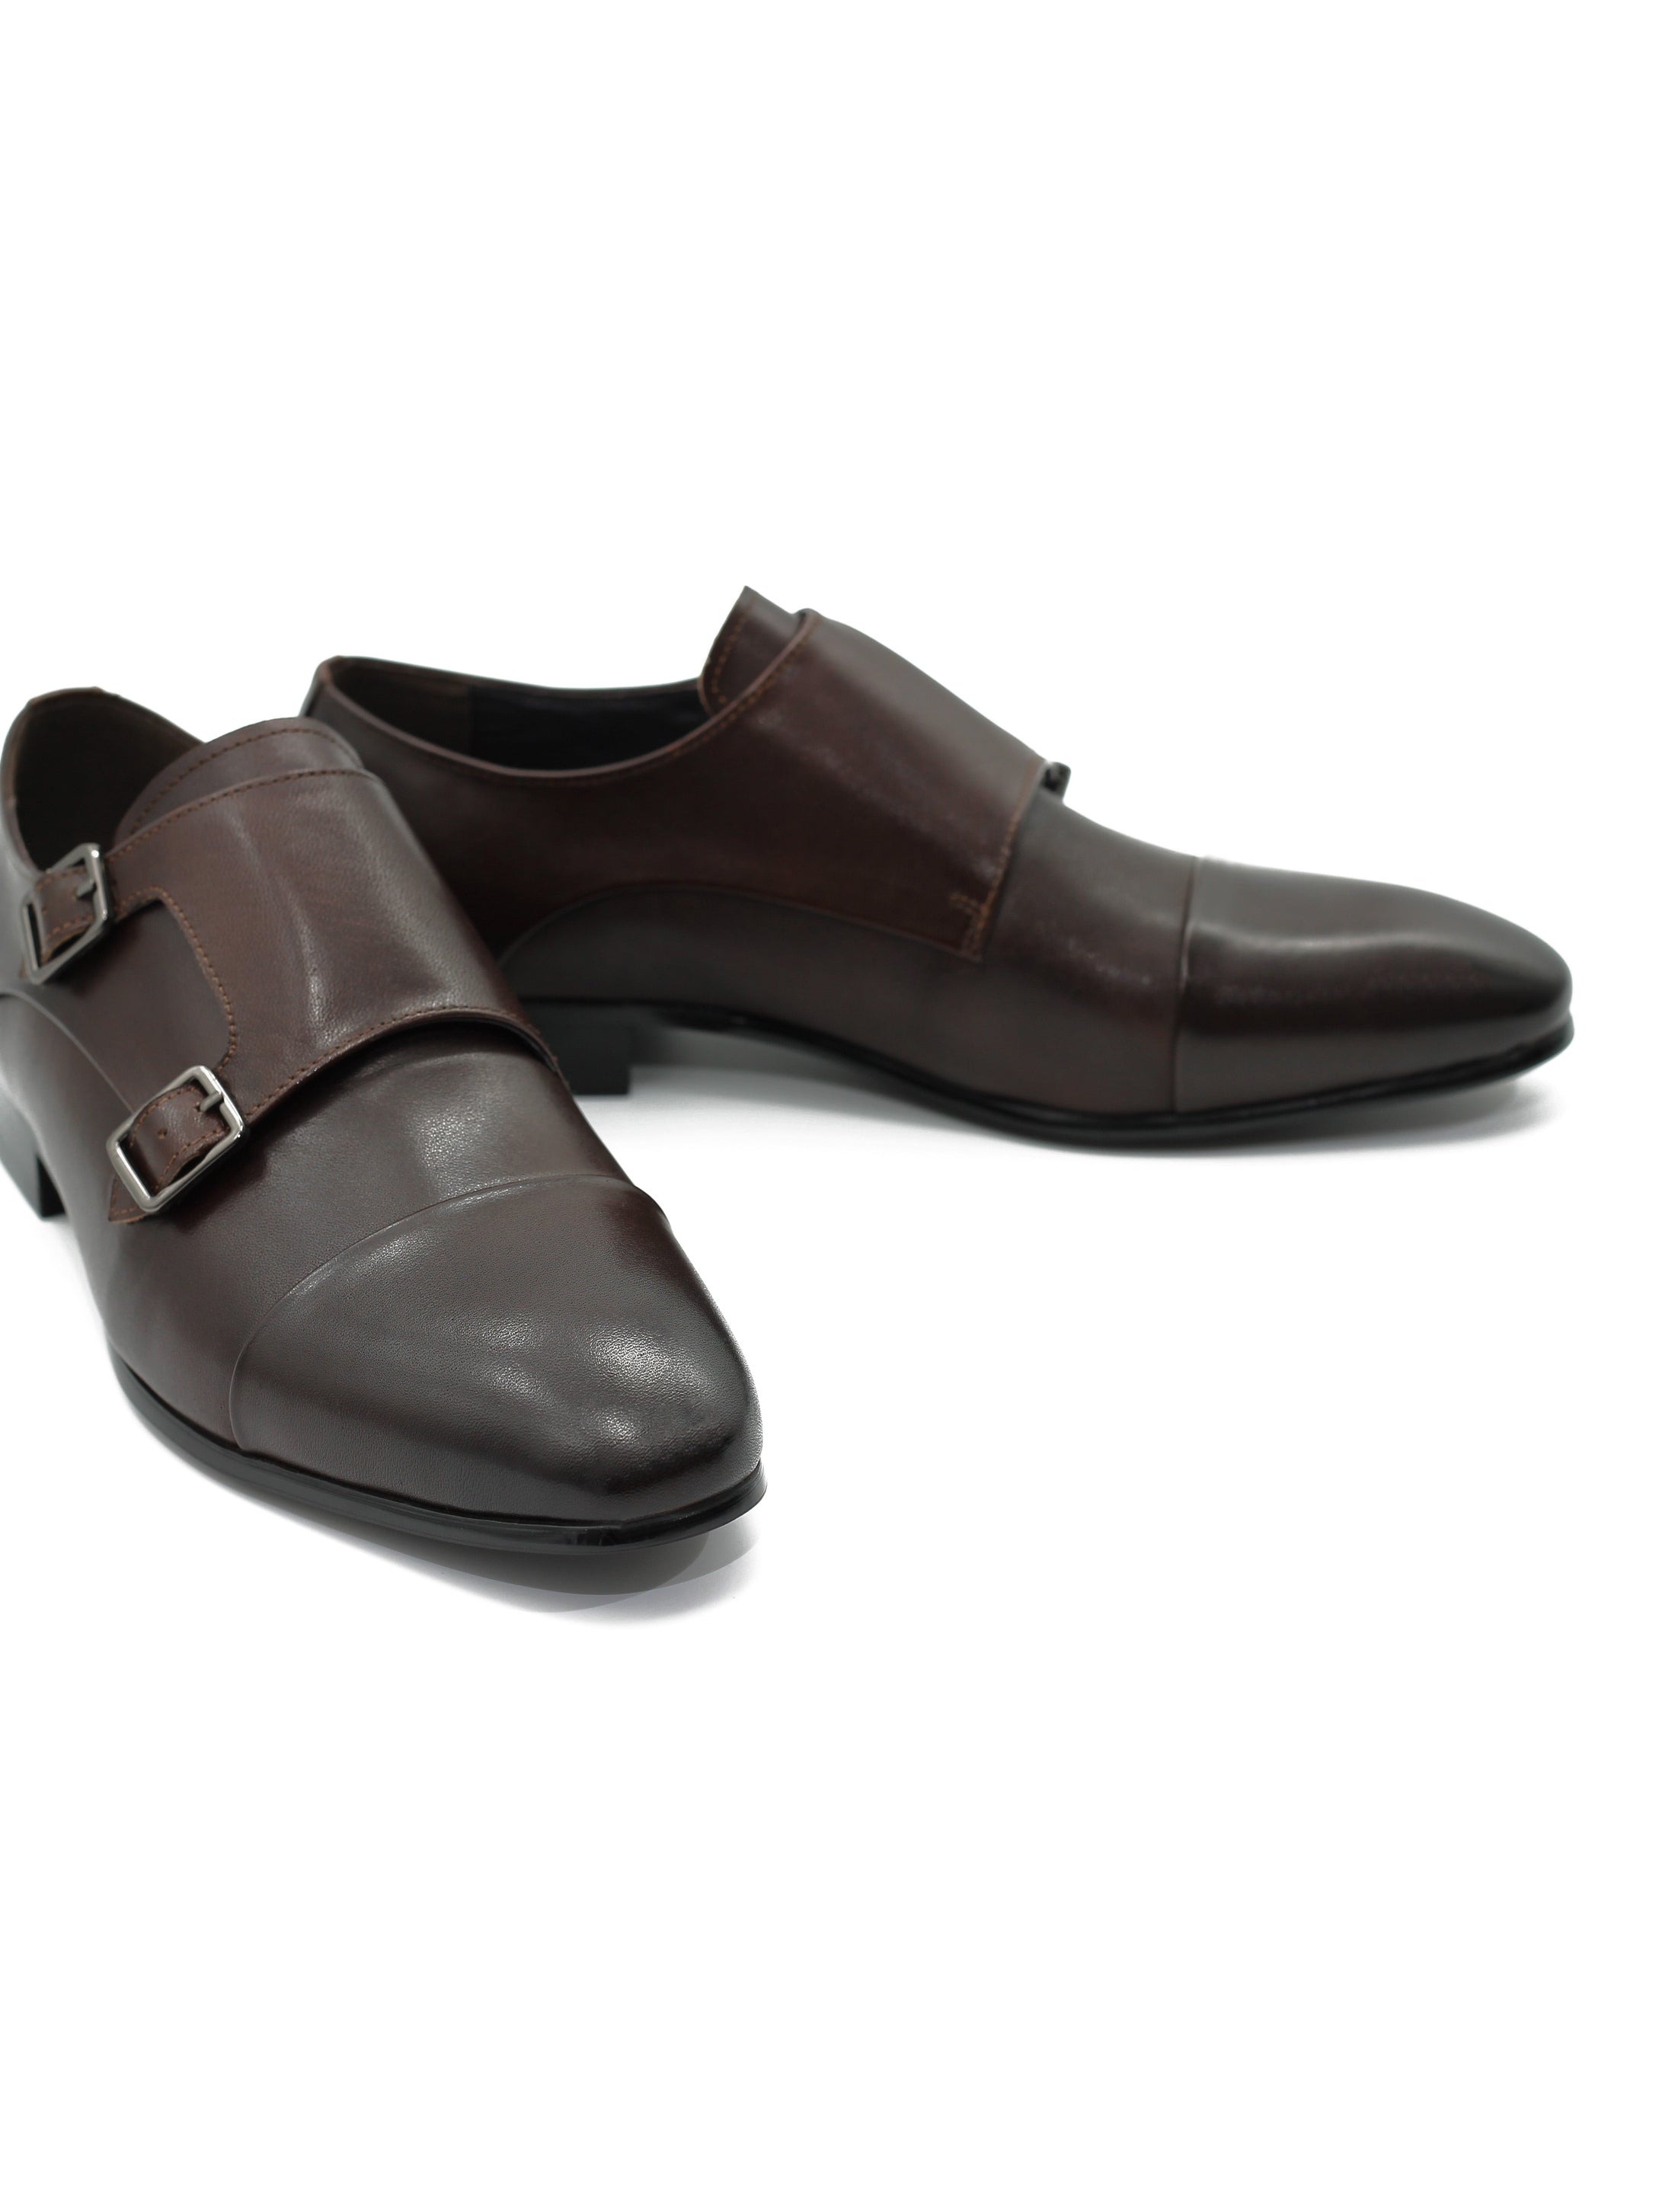 BROWN LEATHER DOUBLE MONK SHOES